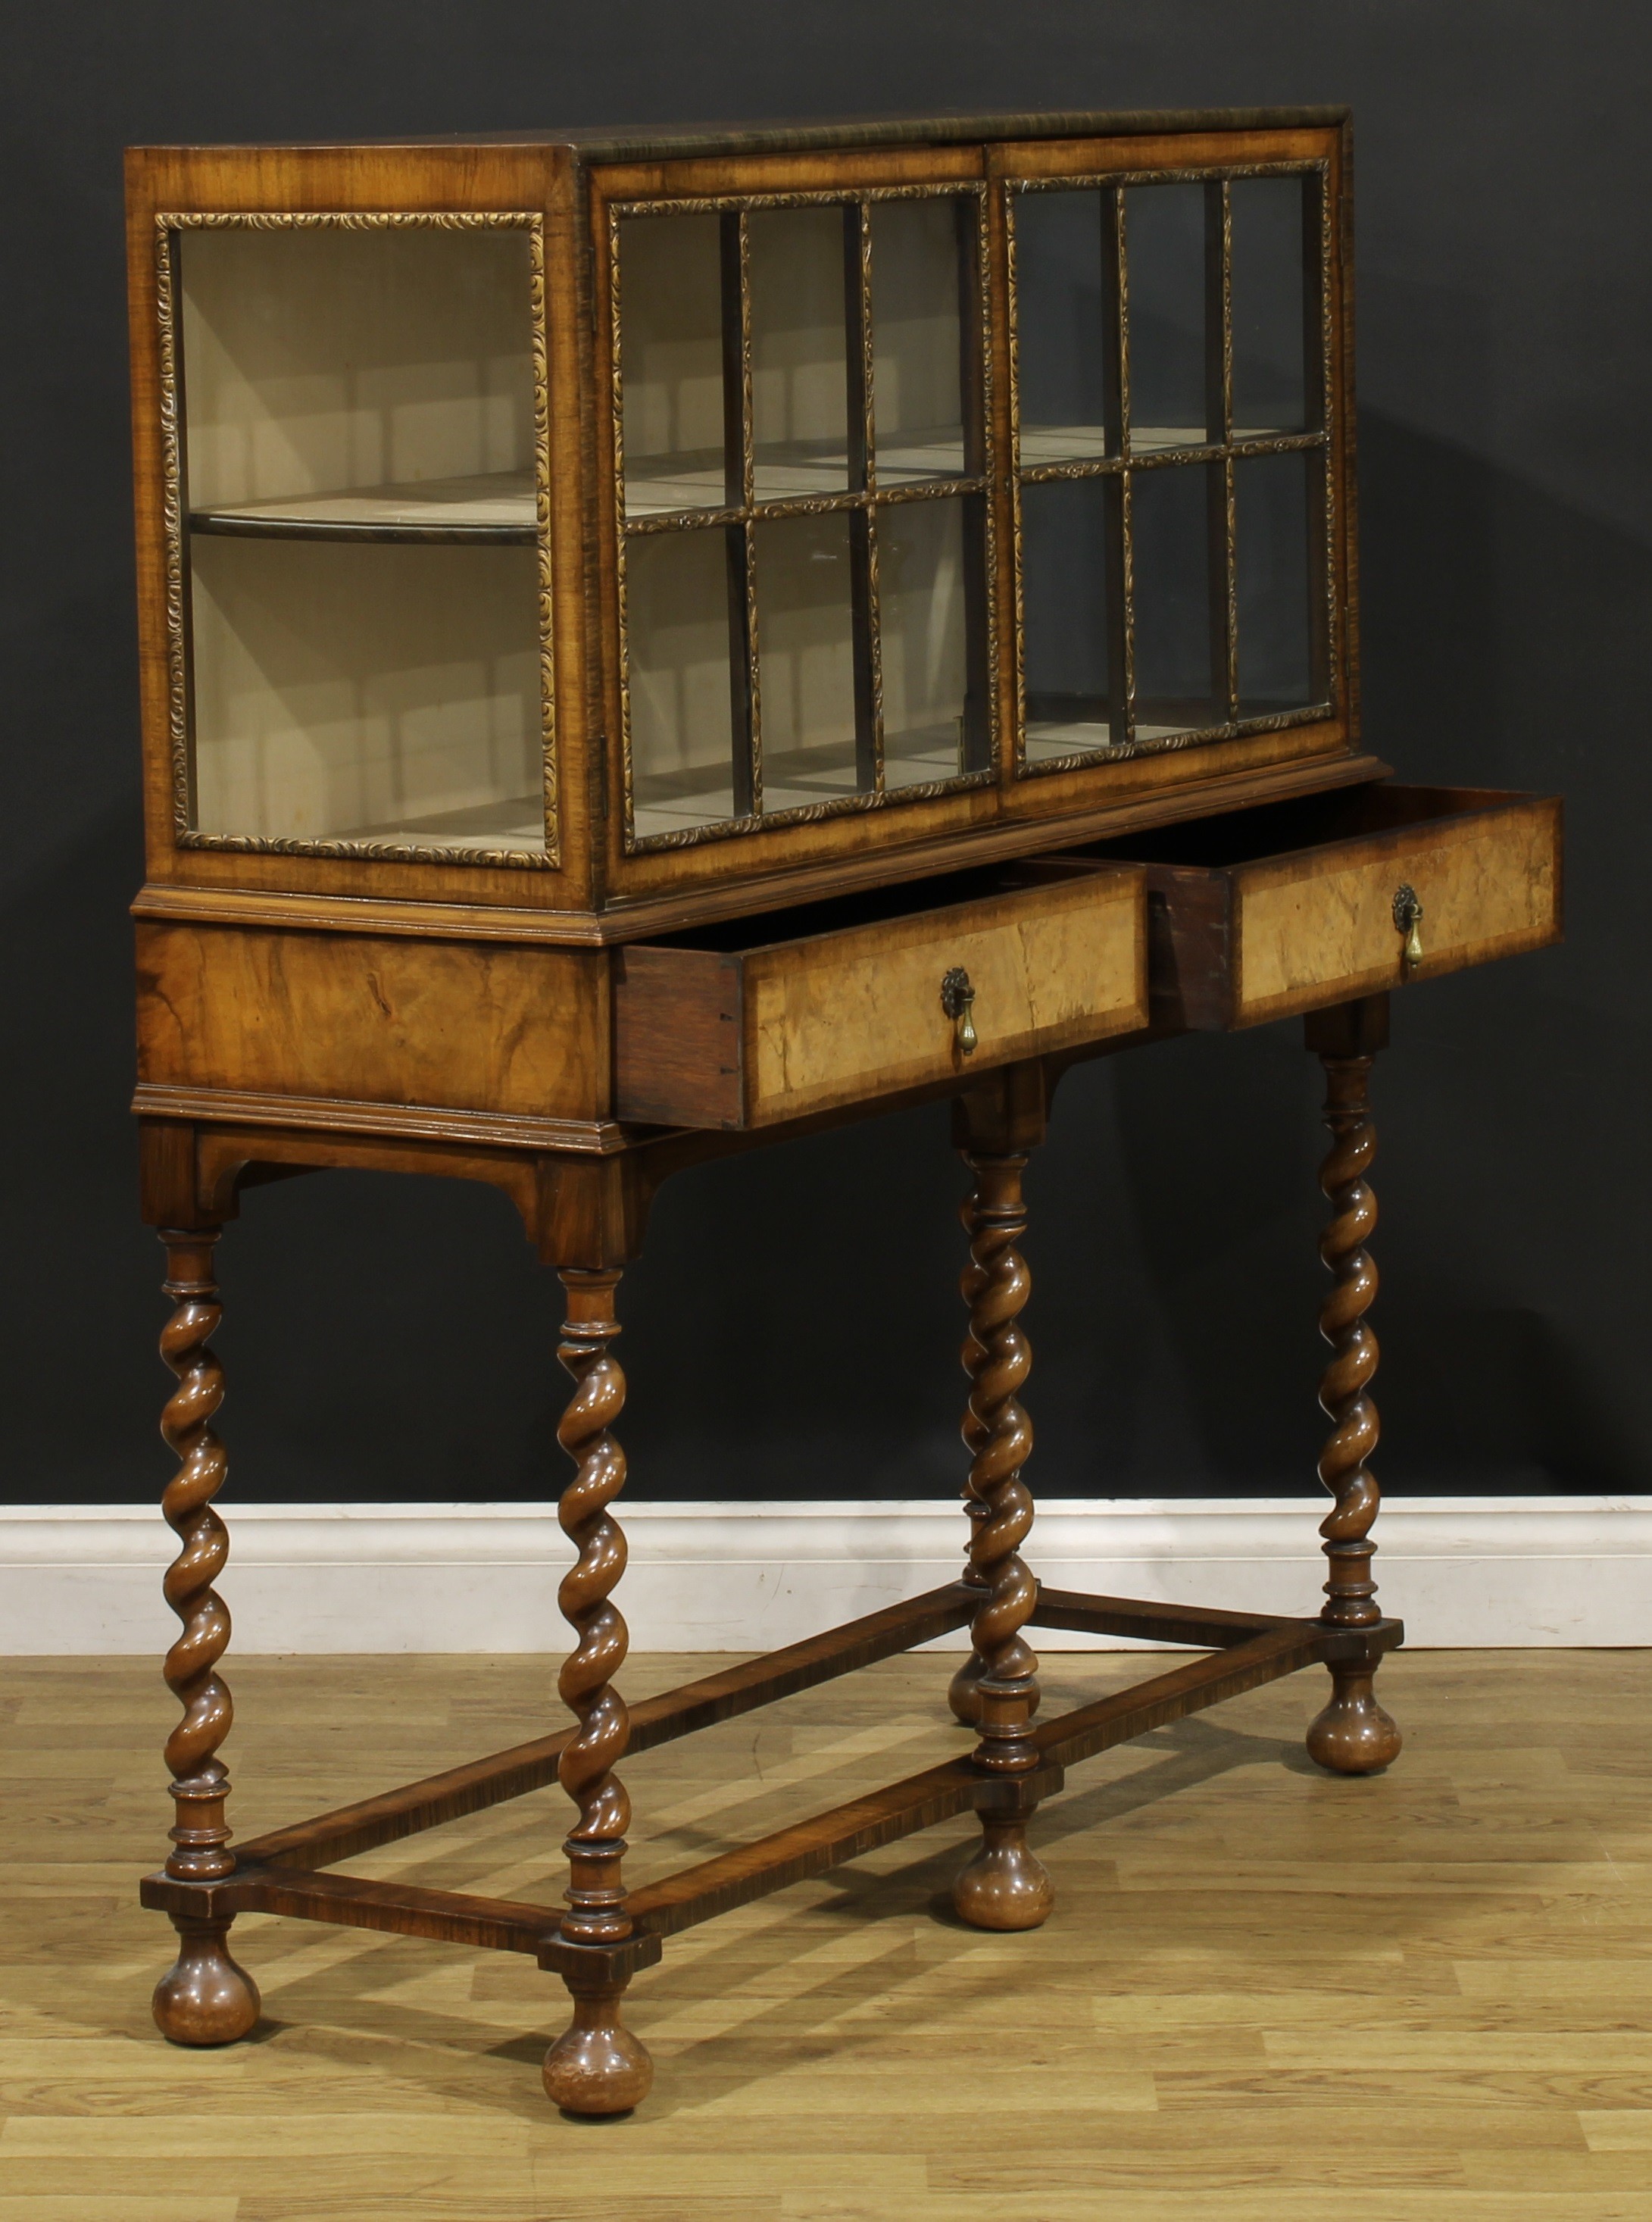 An early 20th century Queen Anne style walnut bookcase or display cabinet, by Hamptons, Pall Mall - Image 4 of 7